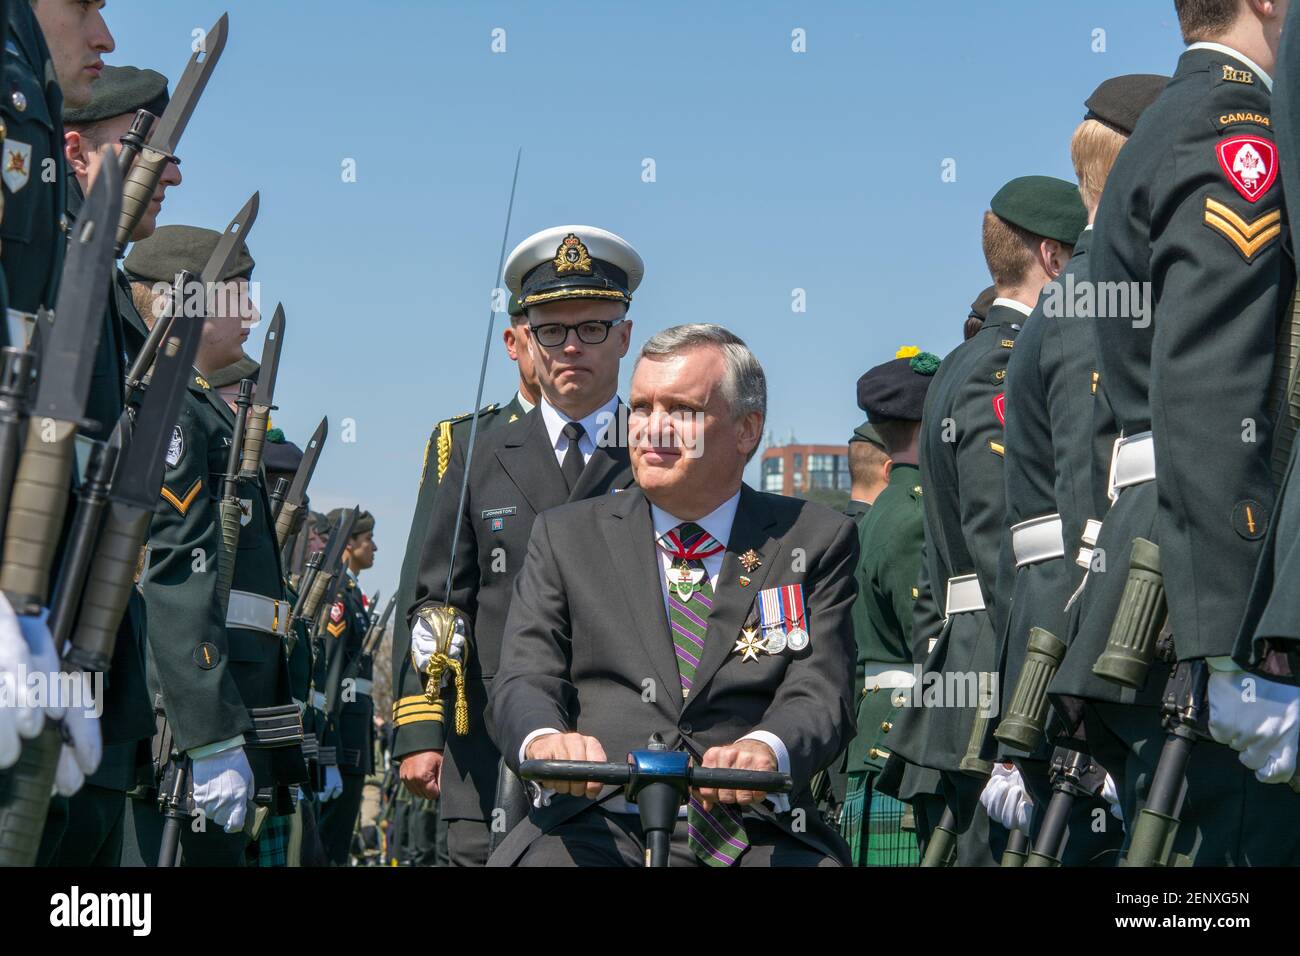 Lieutenant Governor of Ontario David C. Onley, partake in the commemoration of the 200 Anniversary of the Battle of York as seen in Toronto Stock Photo